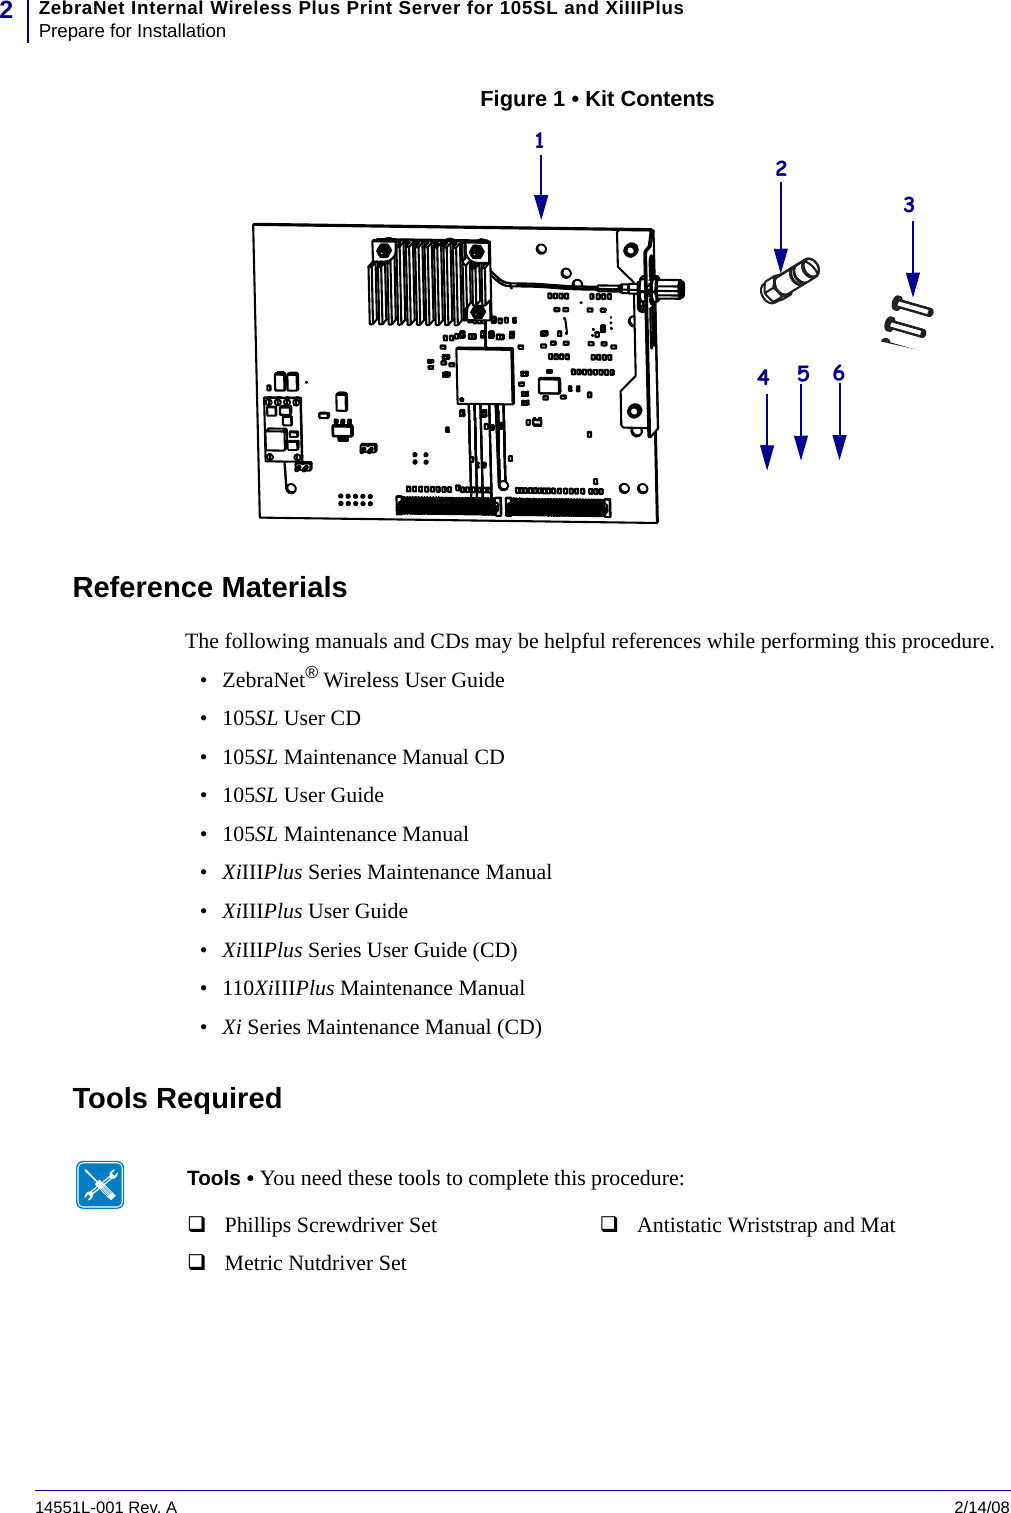 ZebraNet Internal Wireless Plus Print Server for 105SL and XiIIIPlusPrepare for Installation214551L-001 Rev. A   2/14/08Figure 1 • Kit ContentsReference MaterialsThe following manuals and CDs may be helpful references while performing this procedure.•ZebraNet® Wireless User Guide •105SL User CD•105SL Maintenance Manual CD•105SL User Guide•105SL Maintenance Manual•XiIIIPlus Series Maintenance Manual•XiIIIPlus User Guide•XiIIIPlus Series User Guide (CD)•110XiIIIPlus Maintenance Manual•Xi Series Maintenance Manual (CD)Tools Required123456Tools • You need these tools to complete this procedure:Phillips Screwdriver SetMetric Nutdriver SetAntistatic Wriststrap and Mat